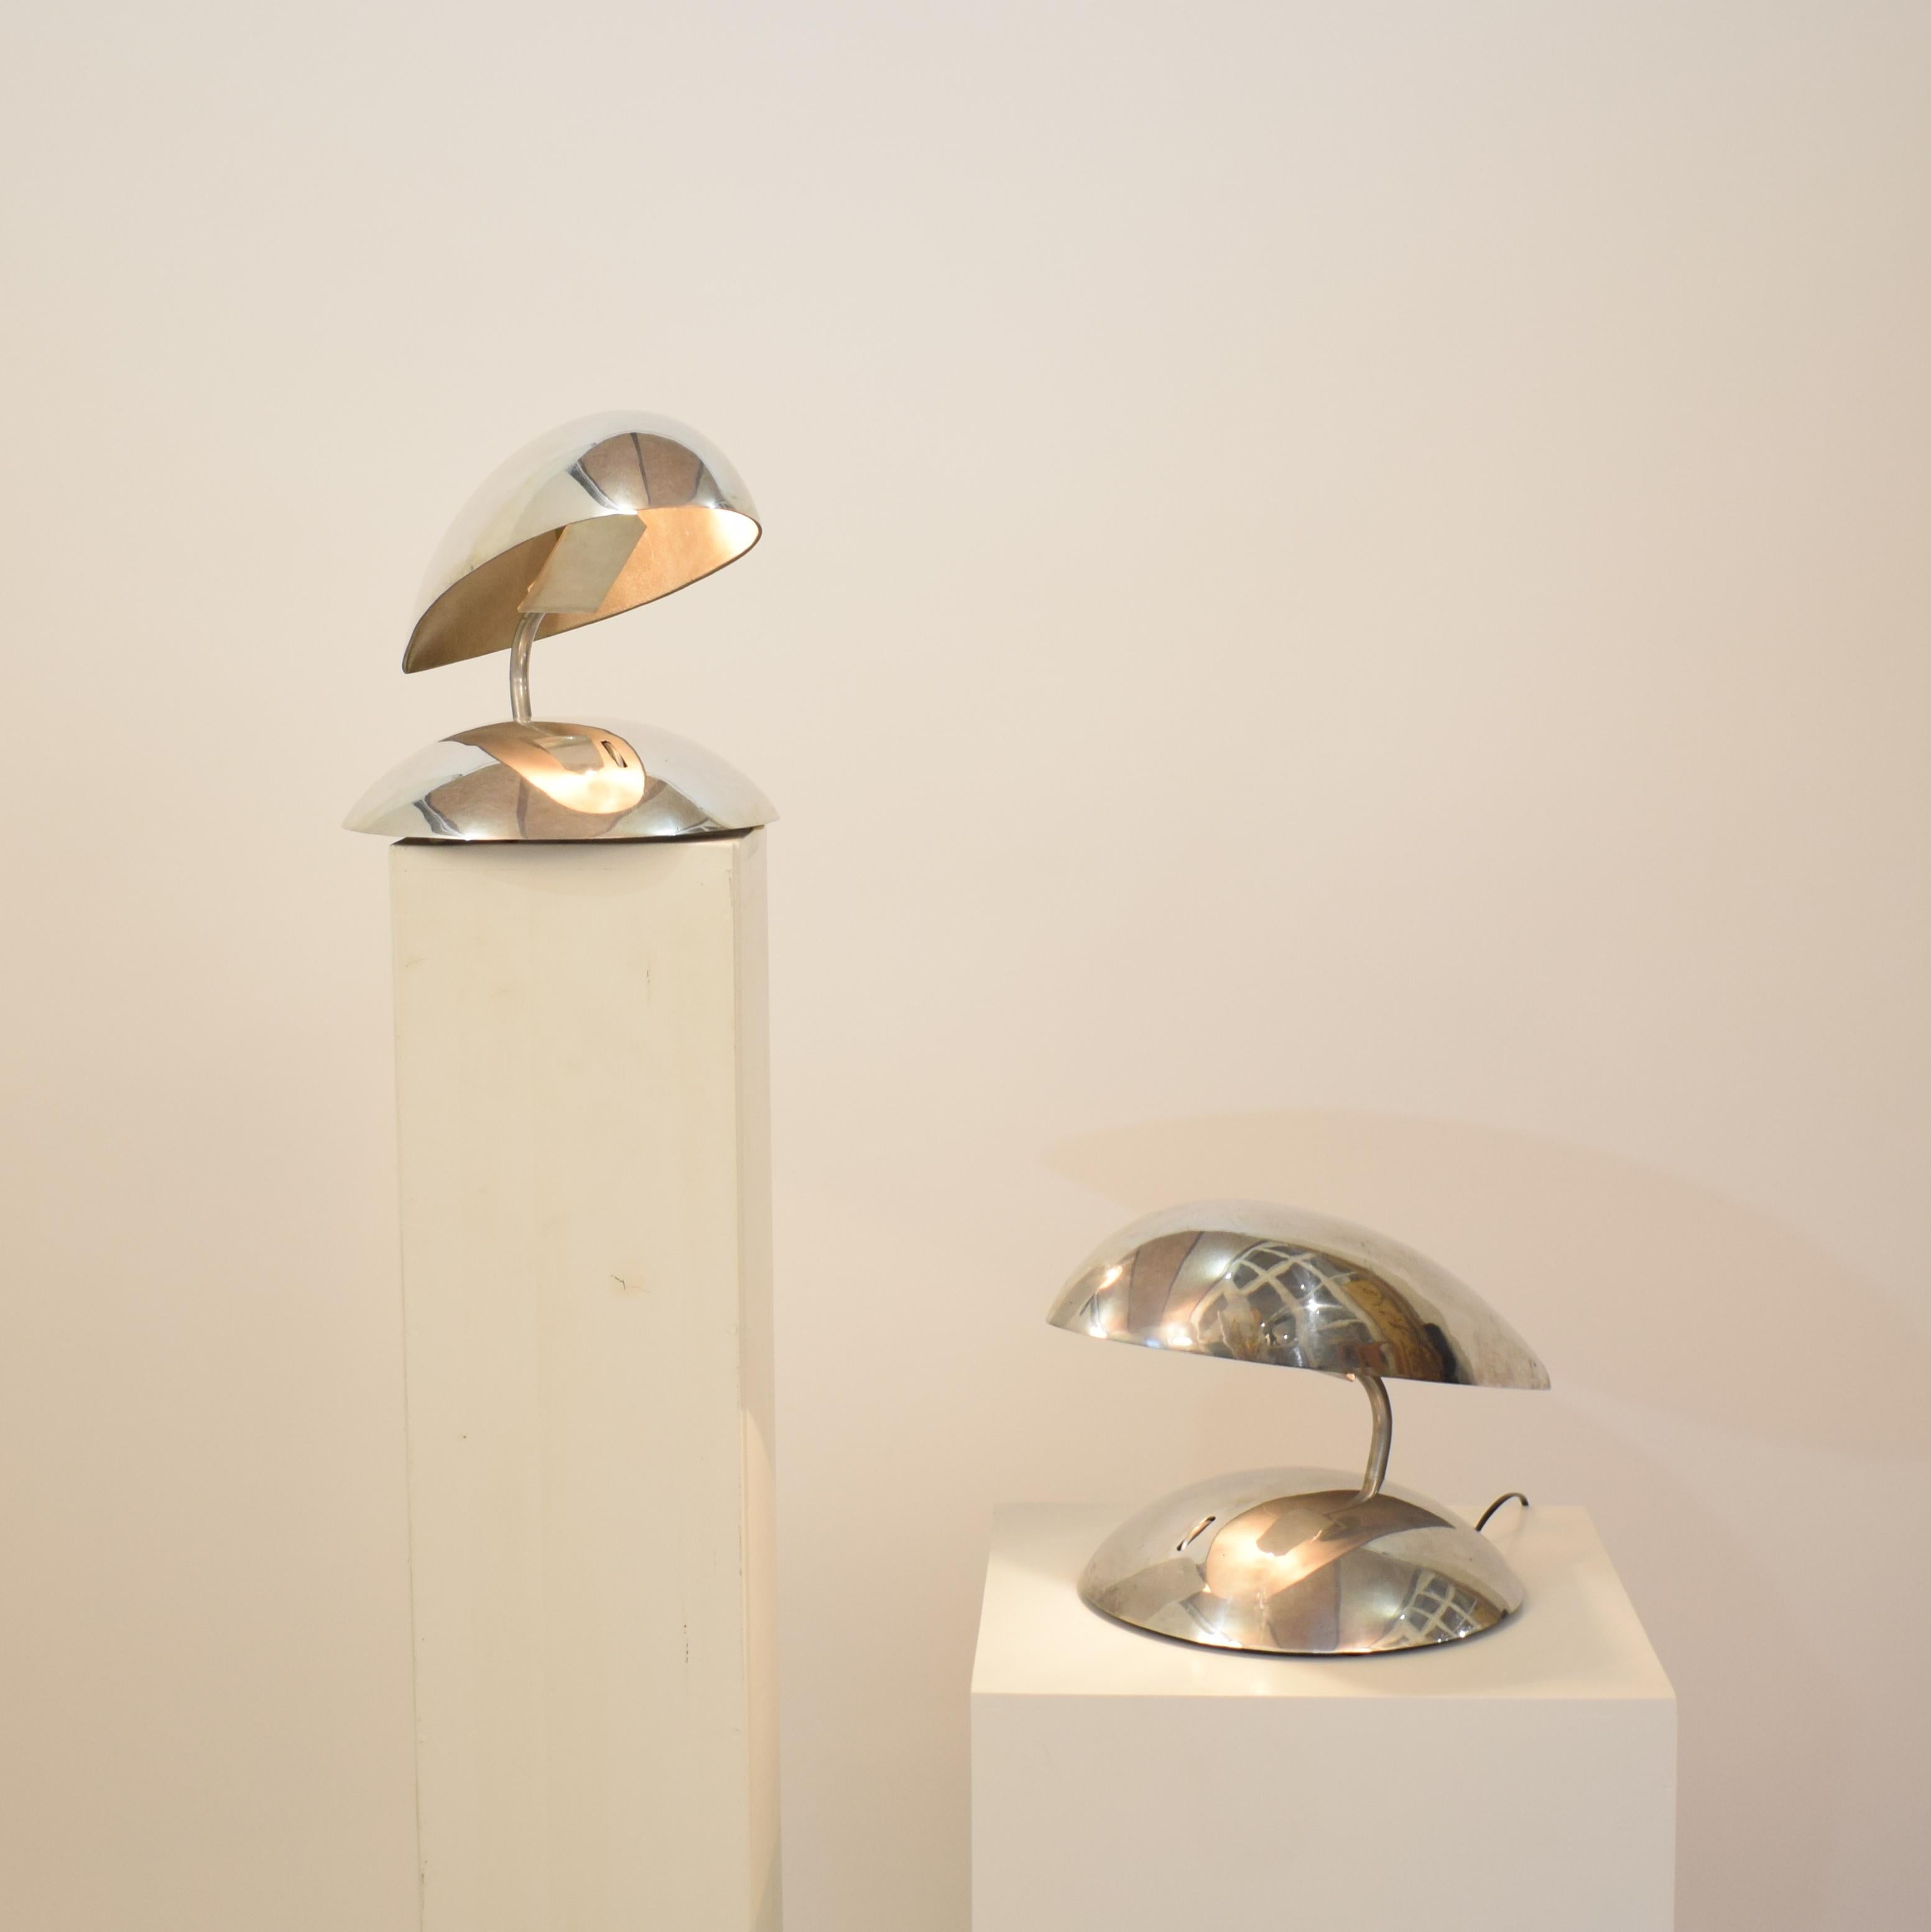 American Pair of Polished Aluminium Space Age / Mid Century Table Lamps from the 1980s For Sale